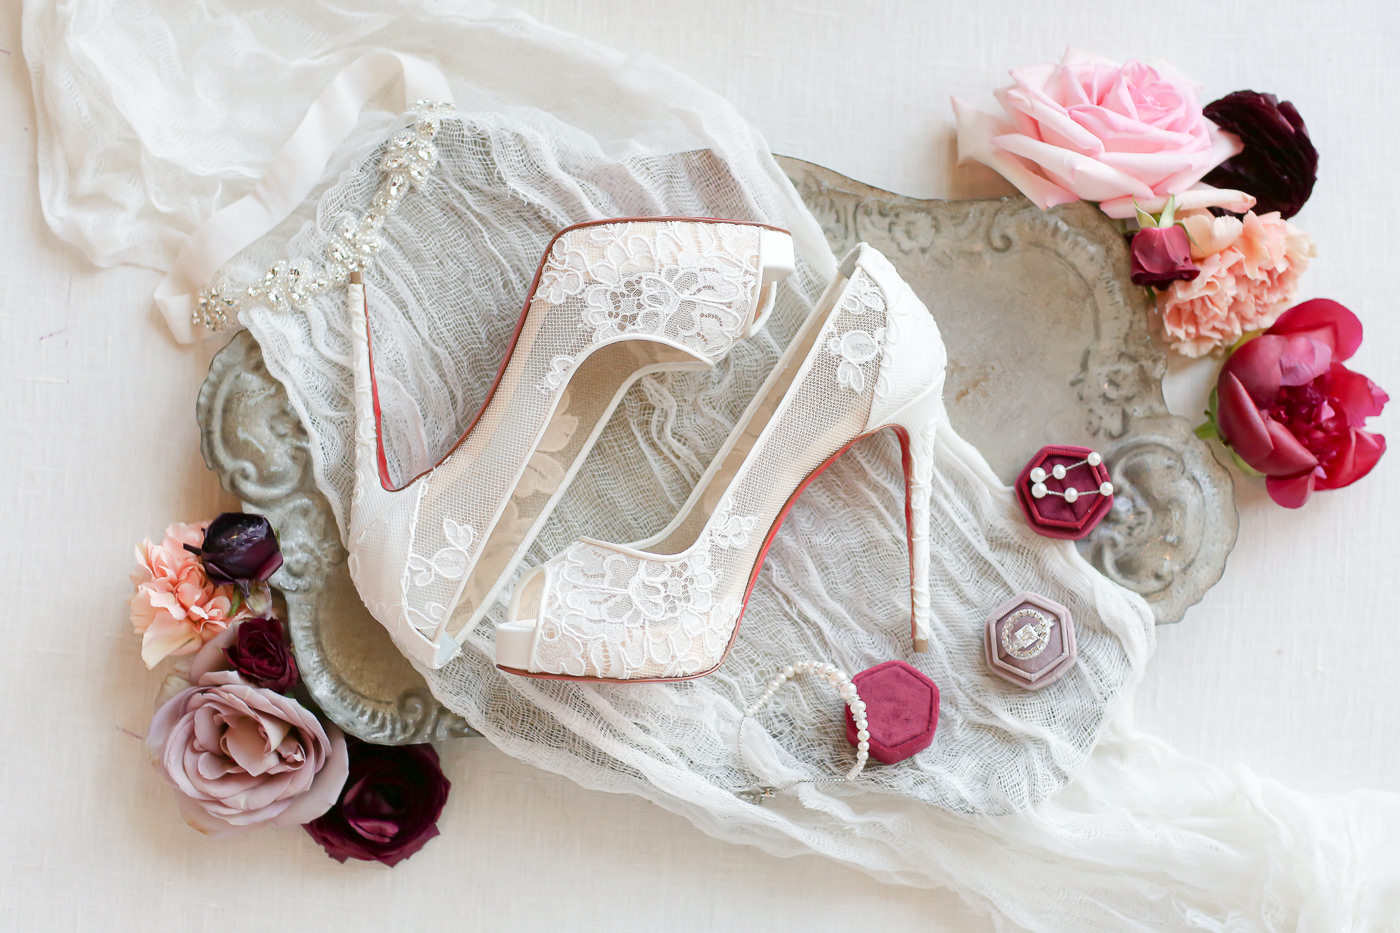 The Very Lace Christian Louboutin Off-White Mesh Peep Toe Red Bottom Wedding Shoes | Wedding Photographer Lifelong Photography Studios | Tampa Bay Wedding Planner Blue Skies Weddings and Events